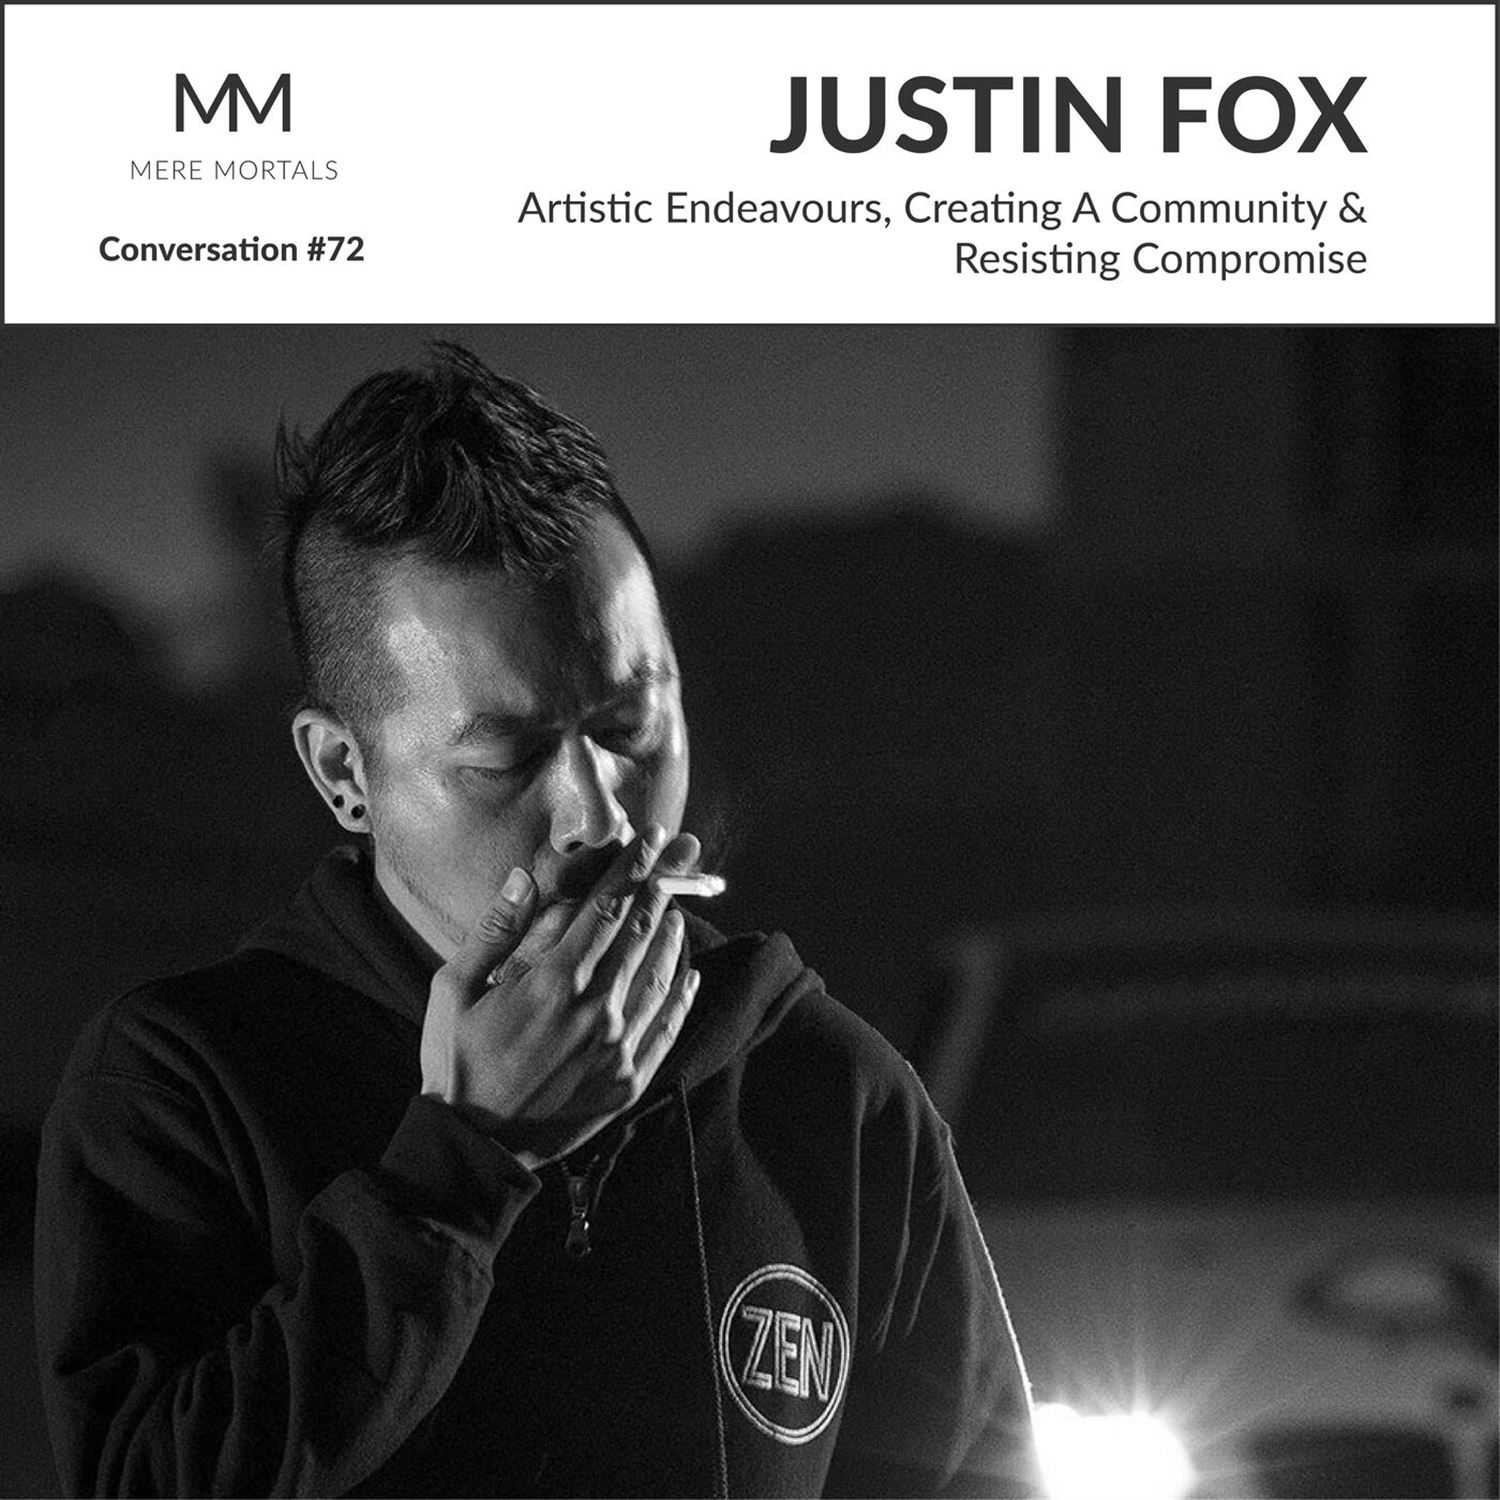 JUSTIN FOX | Artistic Endeavours, Creating A Community & Resisting Compromise